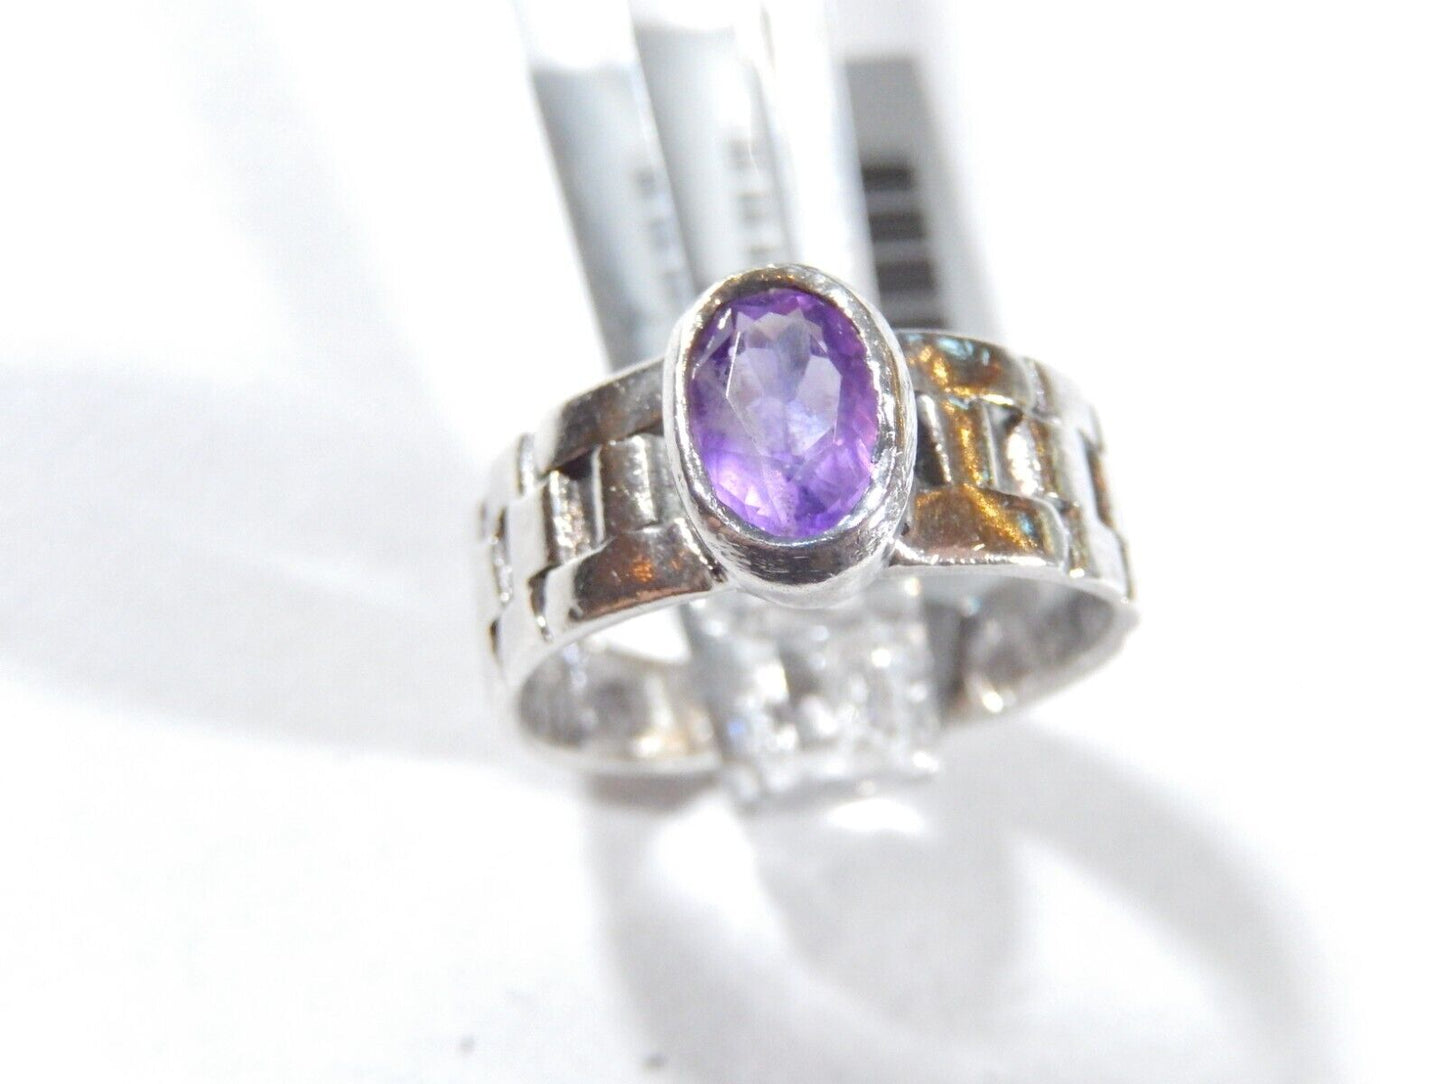 * VINTAGE*  SOUTHWESTERN STERLING SILVER  OVAL FACETED AMETHYST RING SIZE 5.5